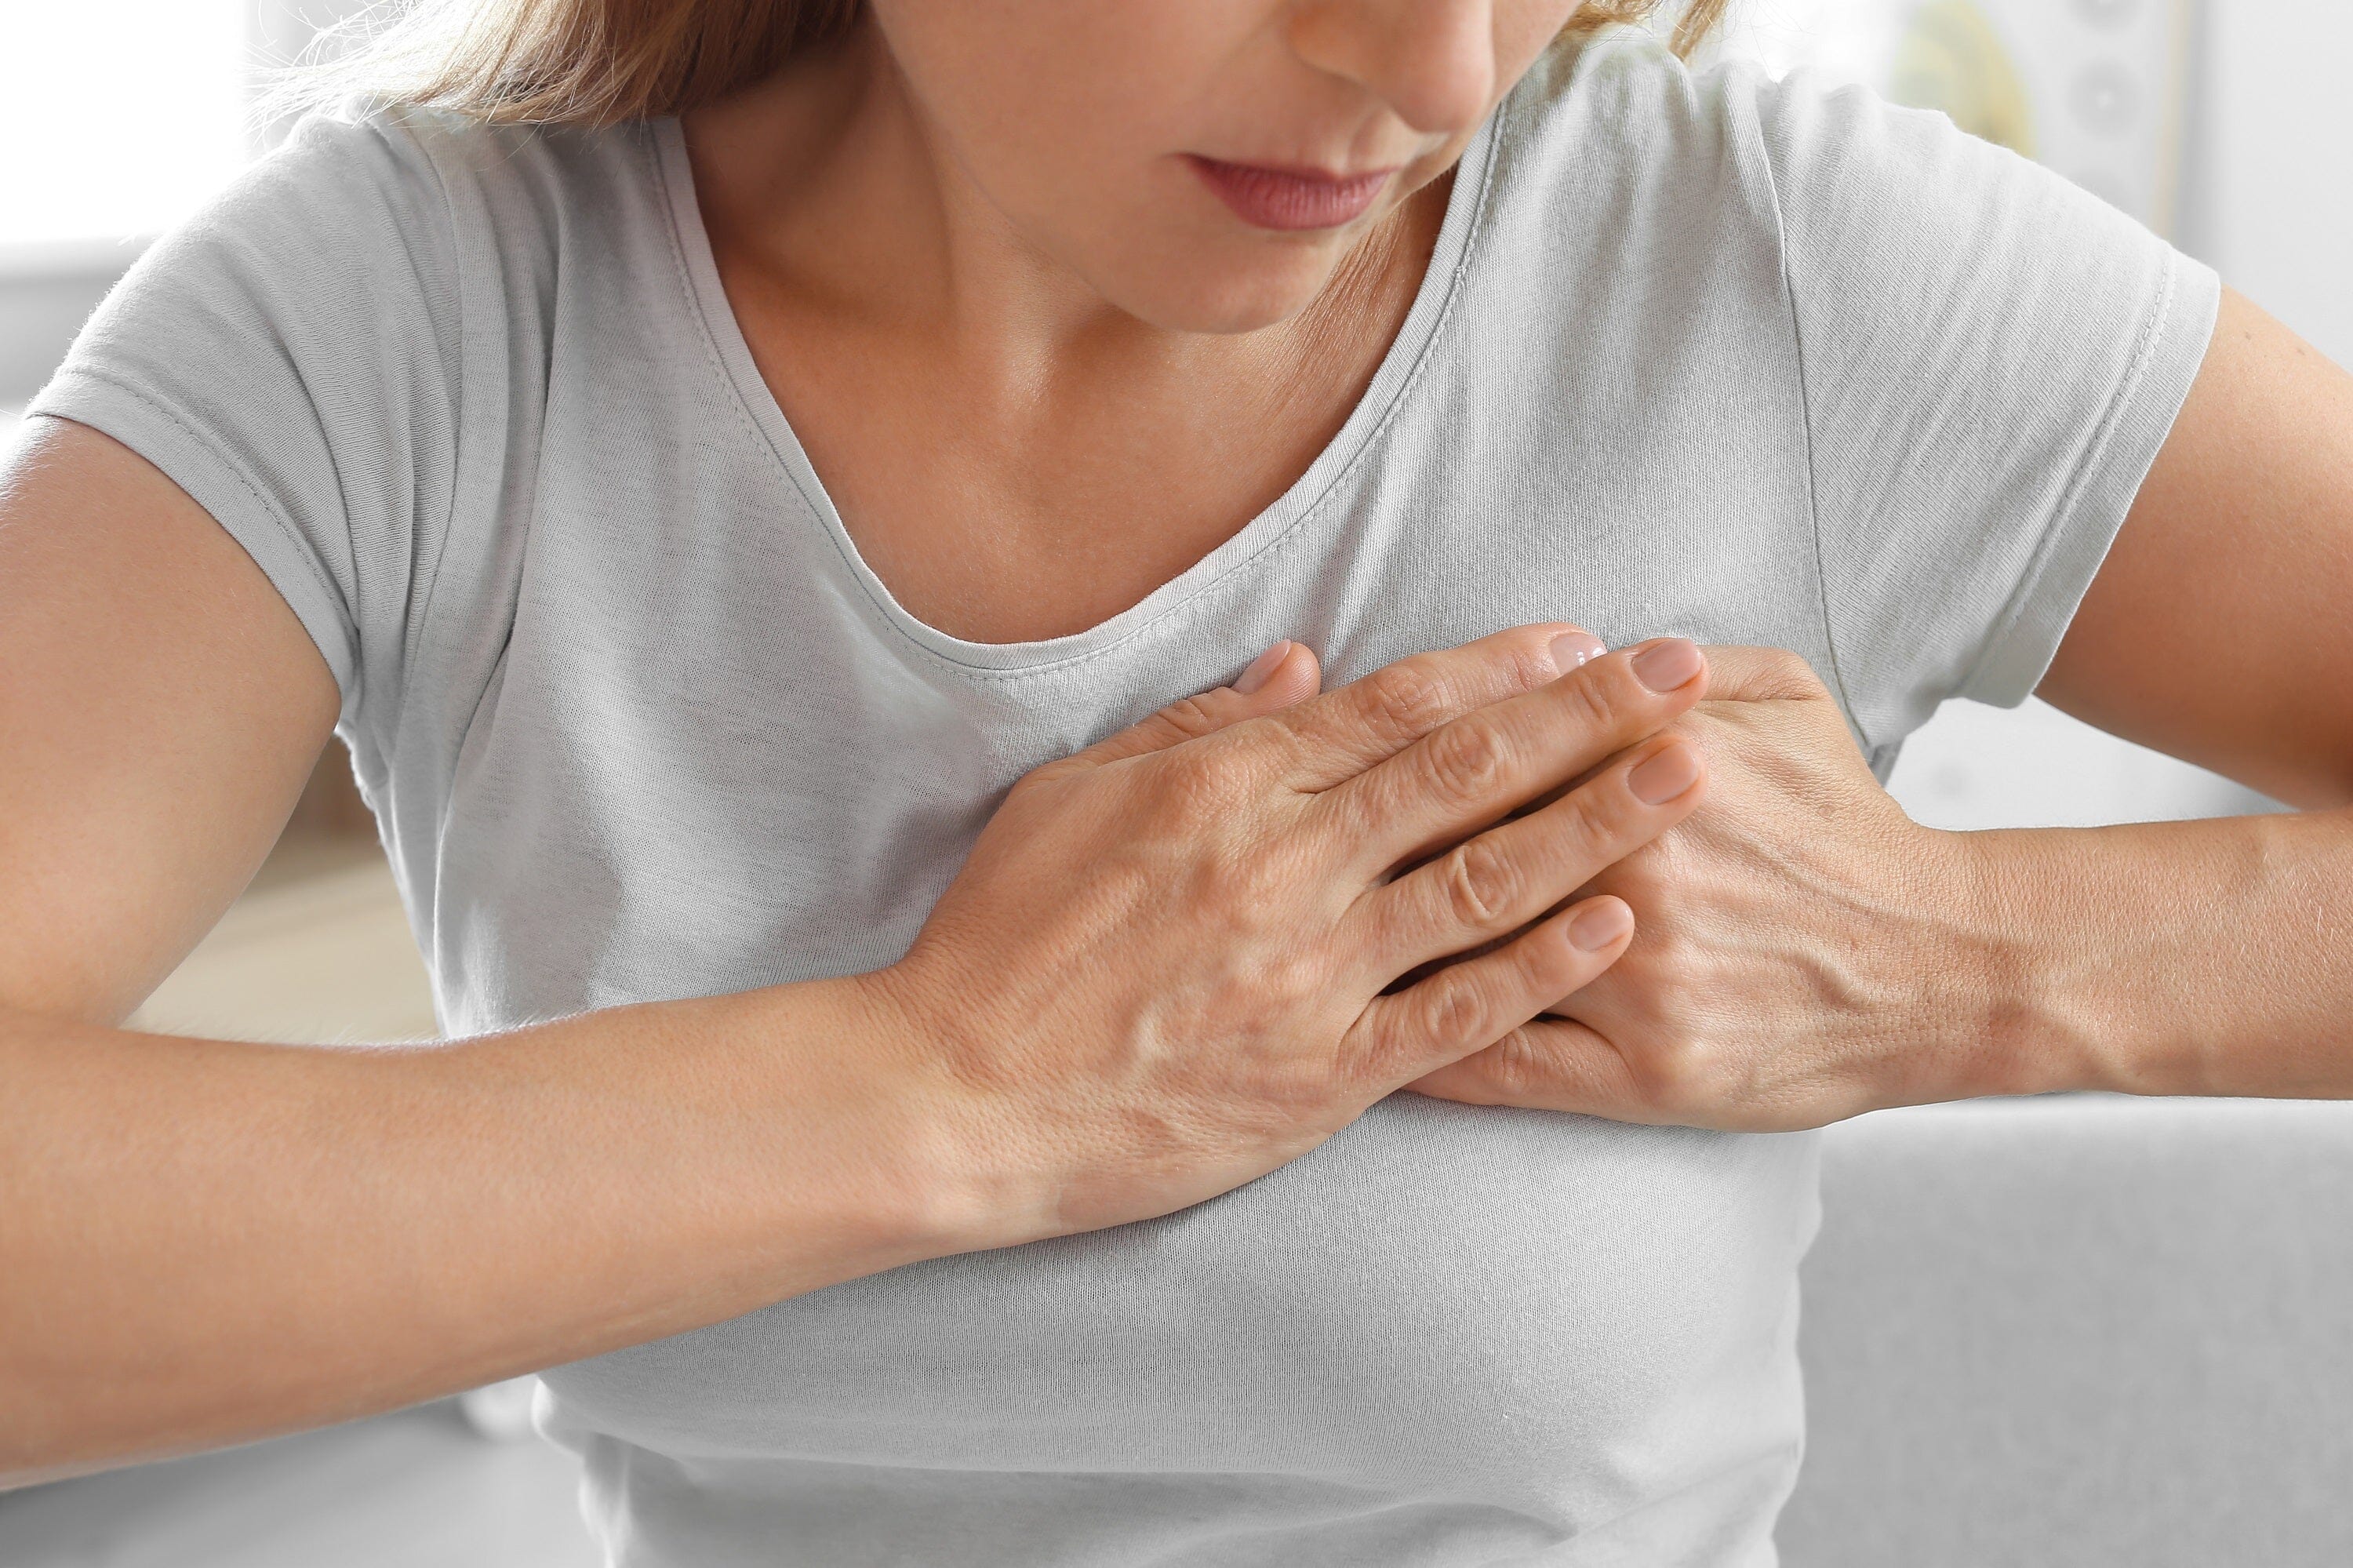 Breast Pain Menopause, Sore Breasts After Menopause